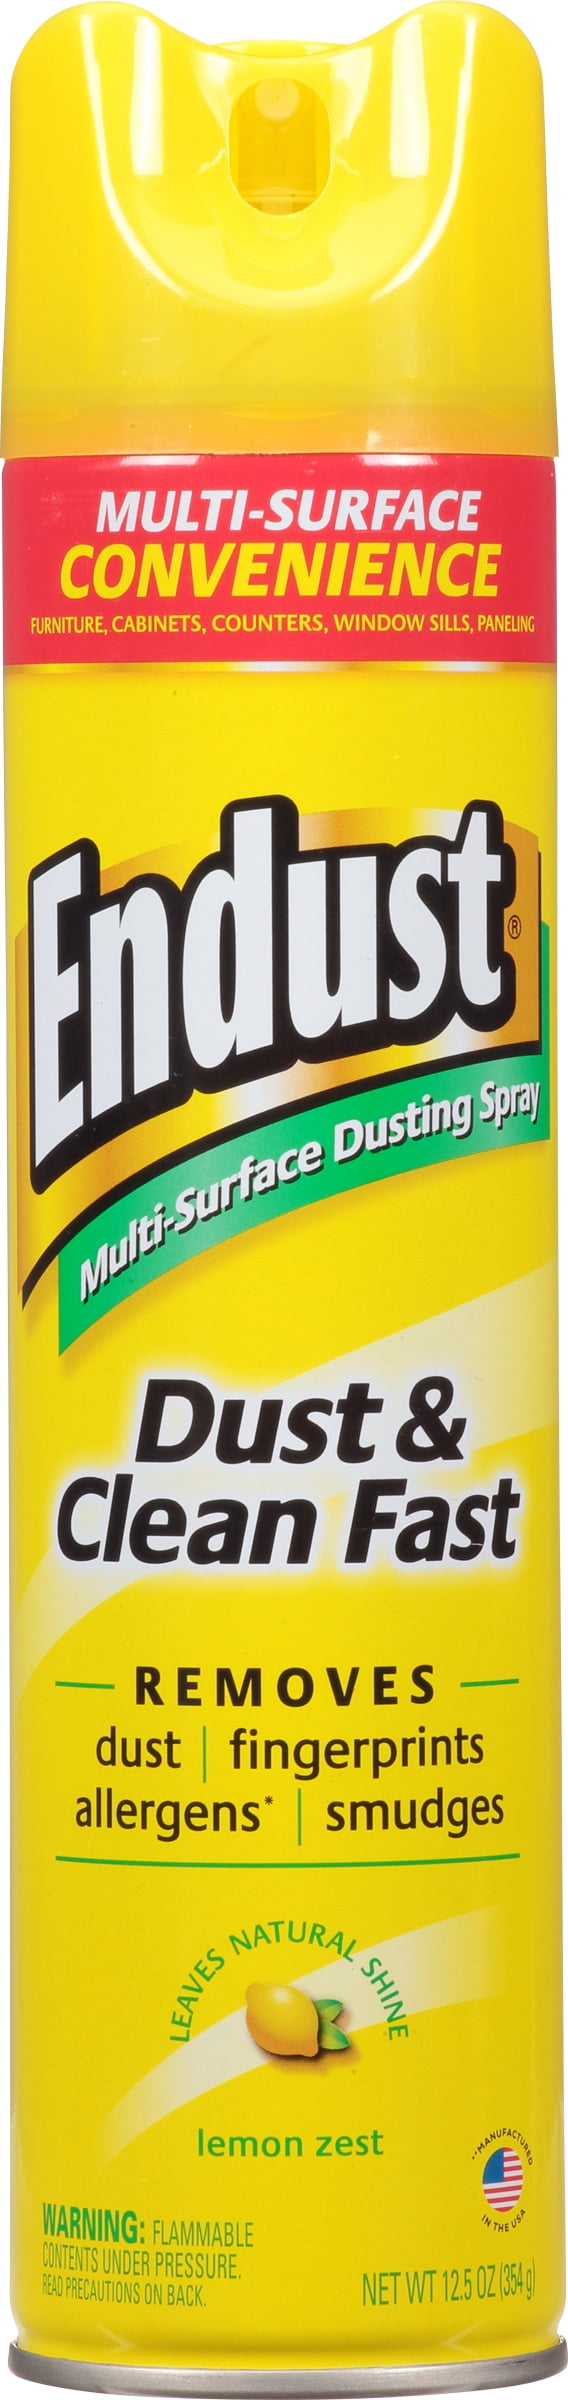 Endust Lemon Zest Multi-Surface Dusting and Cleaning Spray, 12.5 Ounce